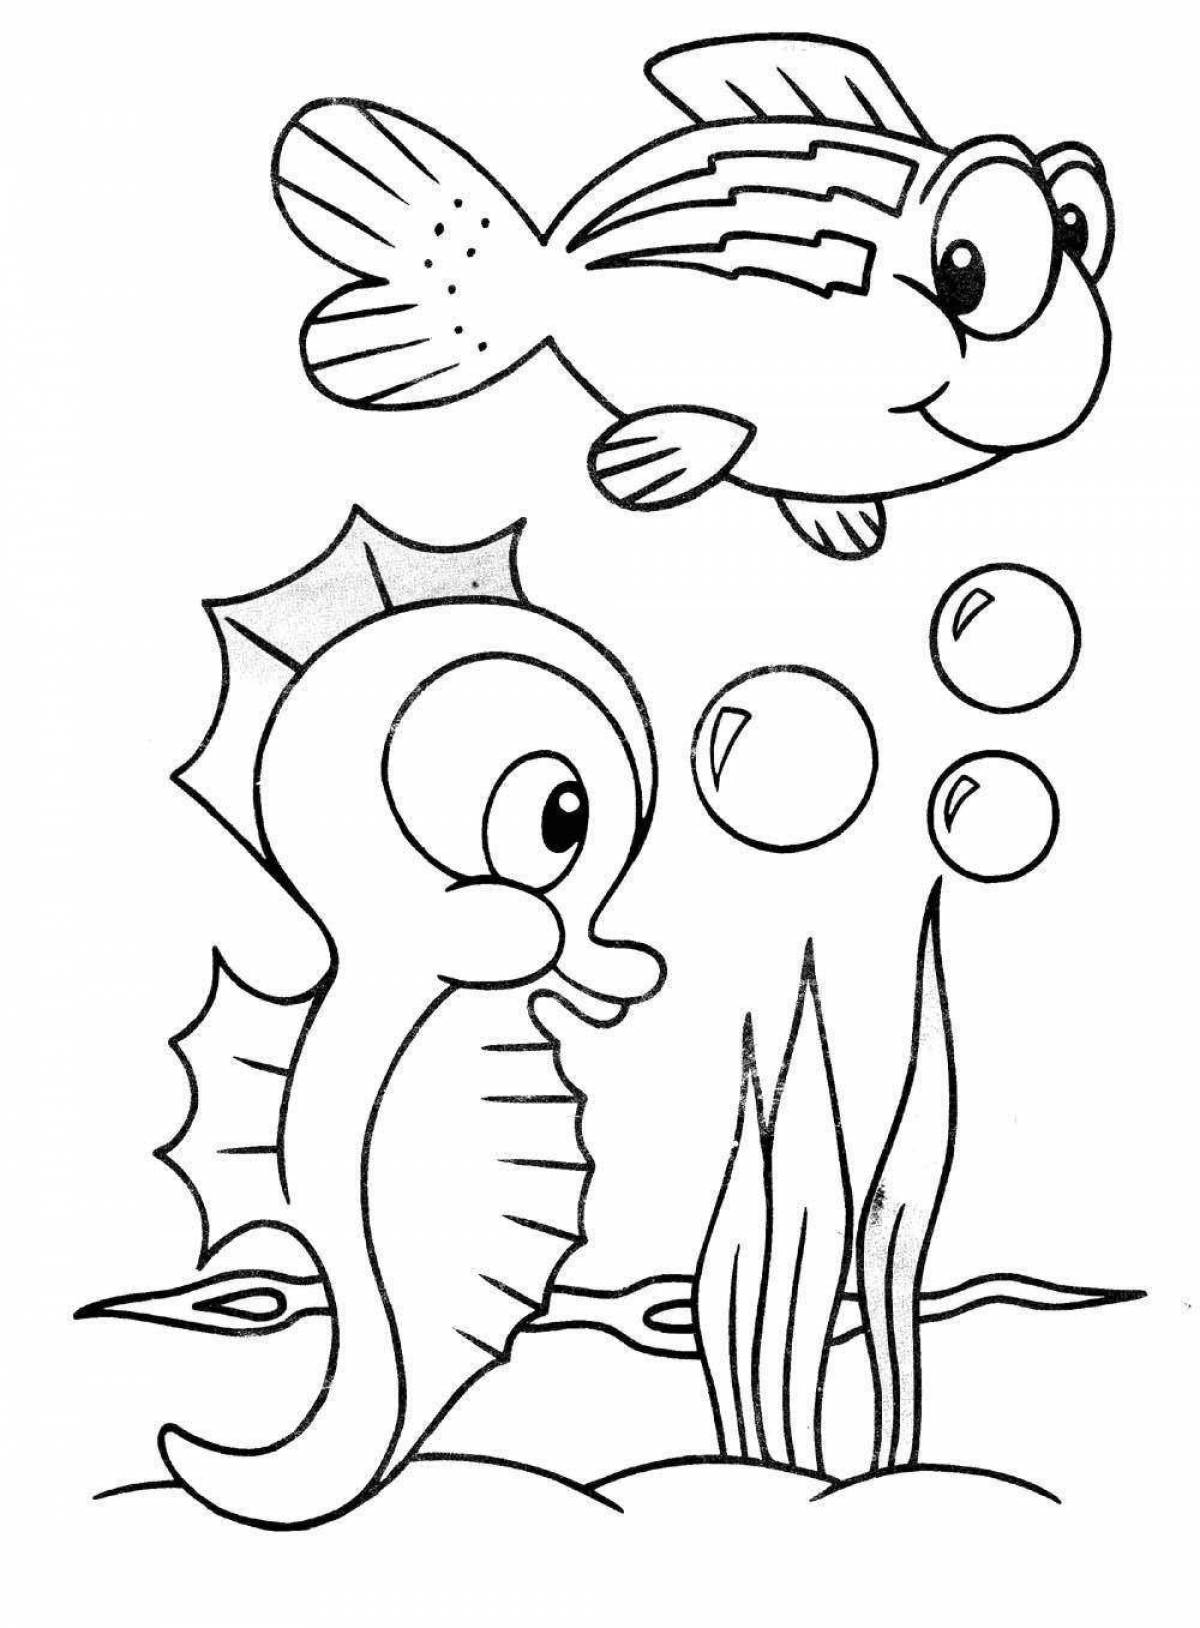 Great fish coloring book for 5-6 year olds